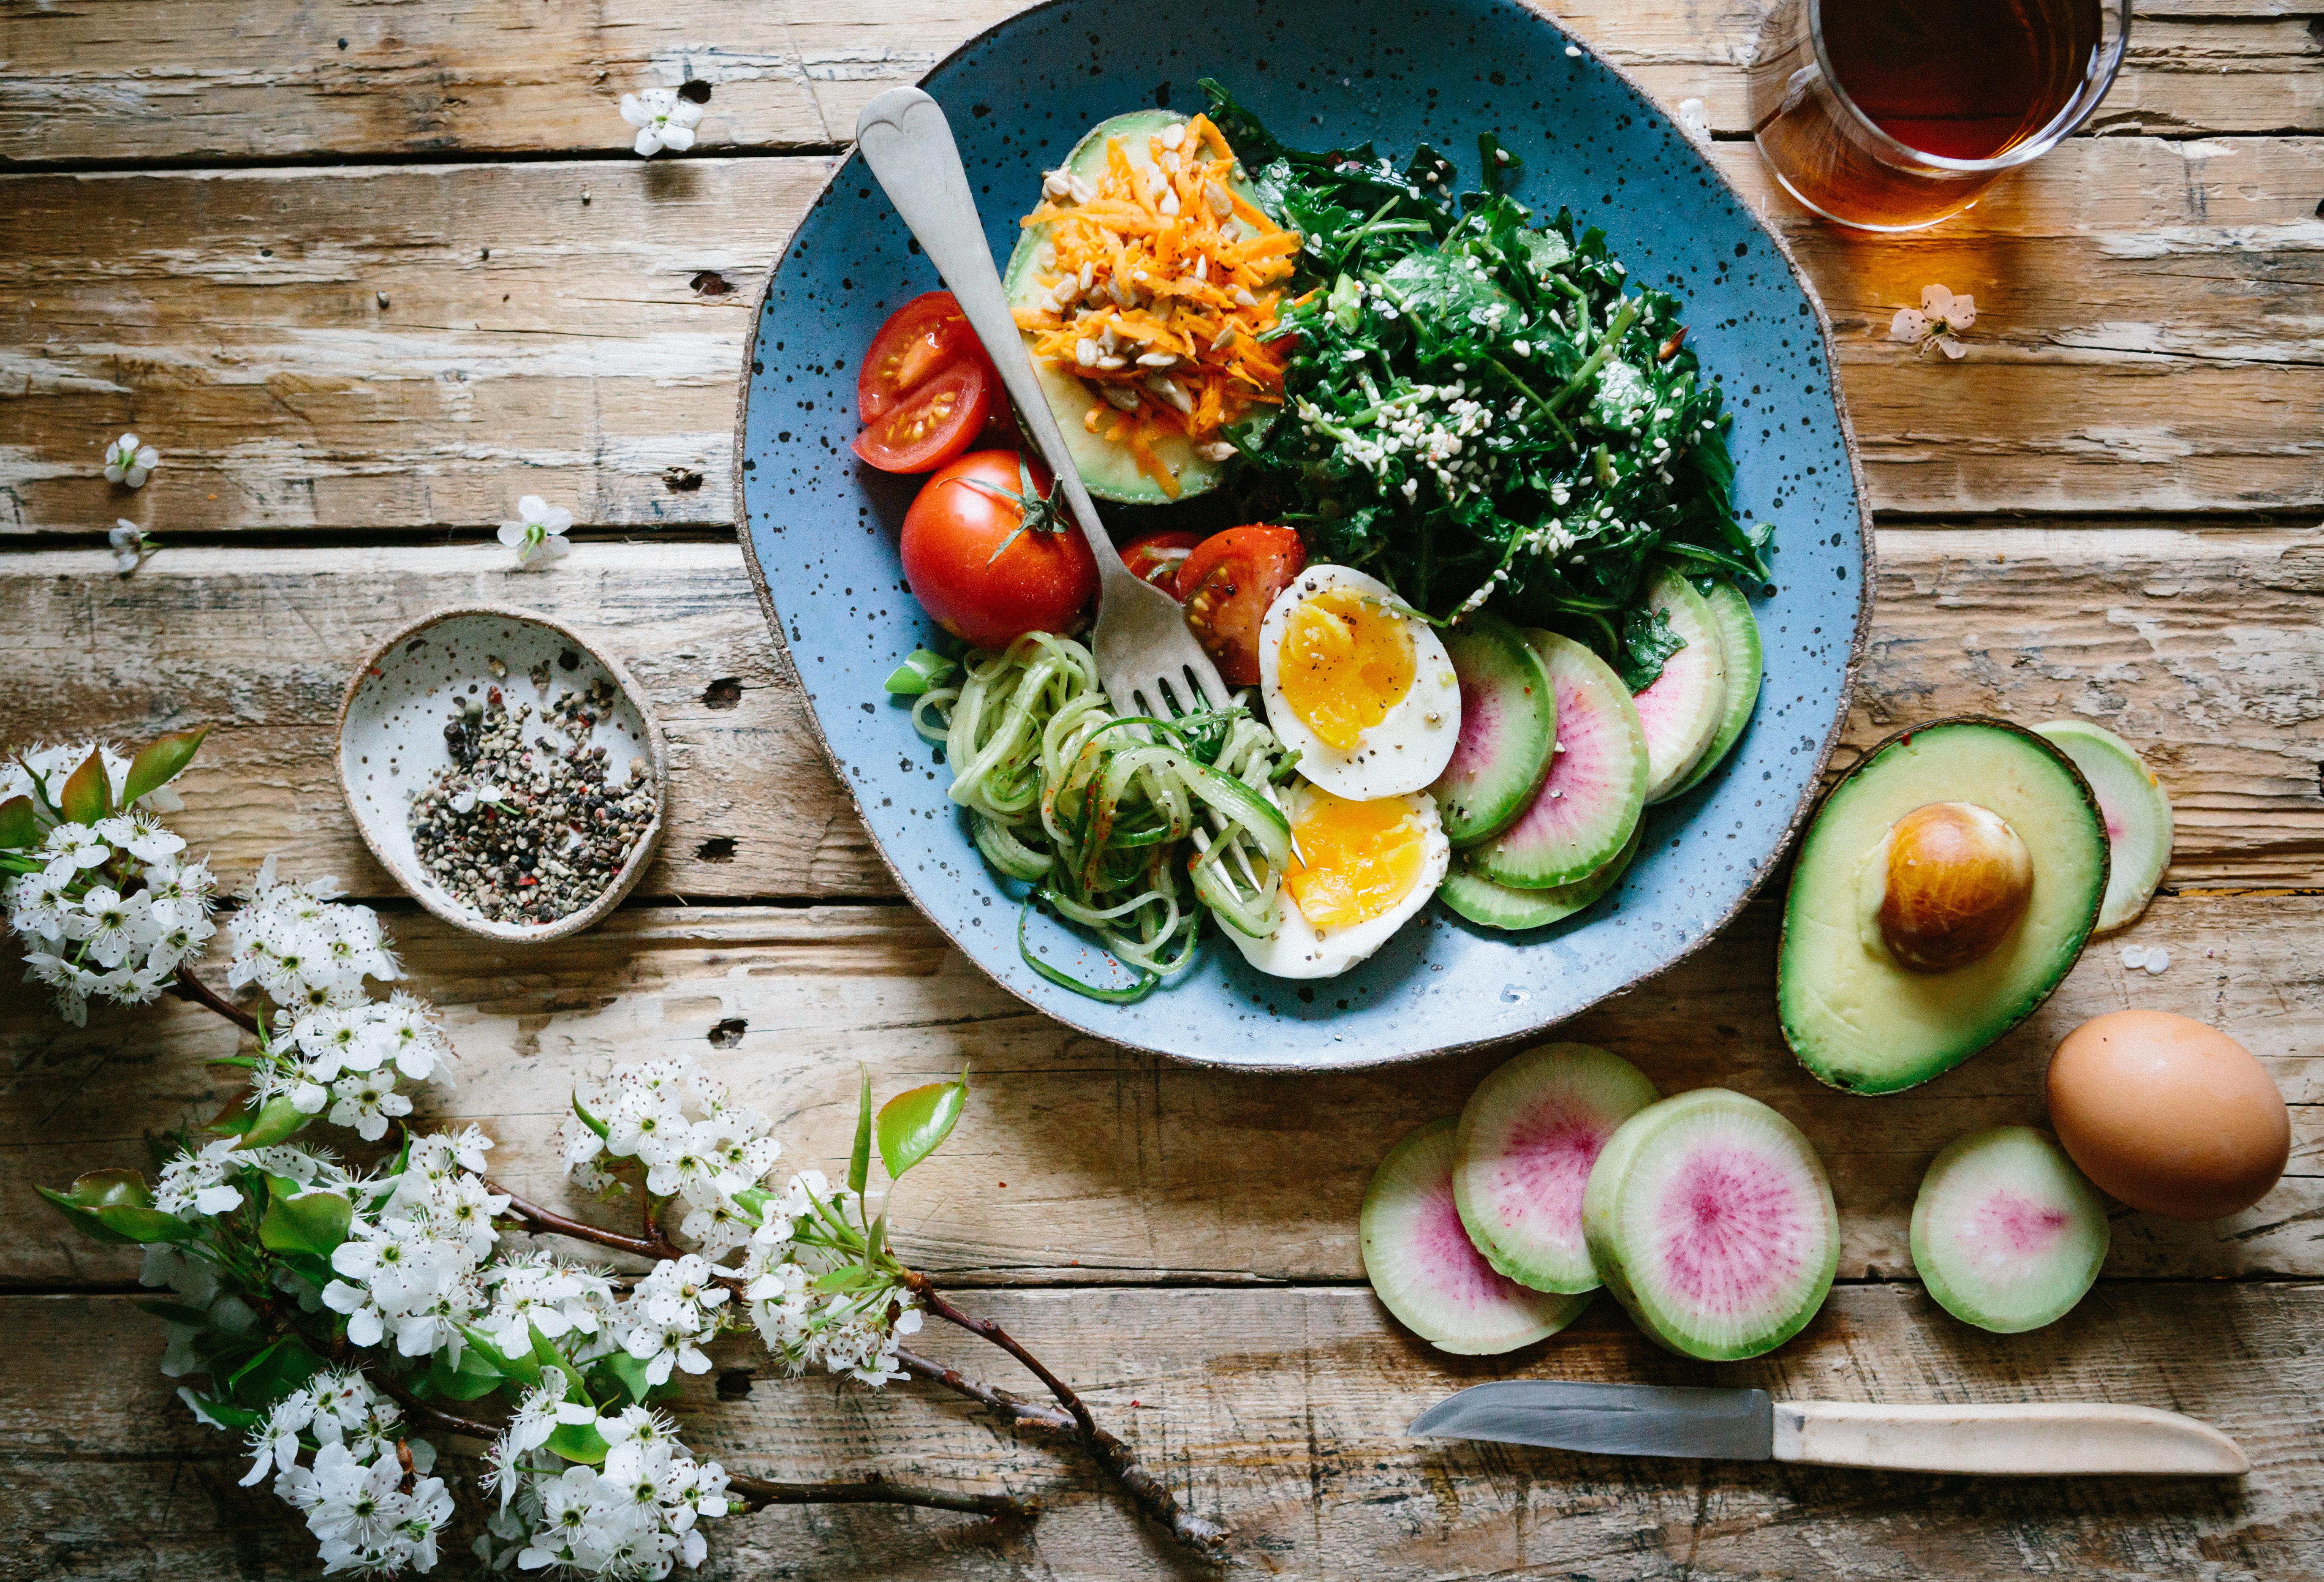 Photo by Brooke Lark on Unsplash. A plate with appetizing food on a wooden table